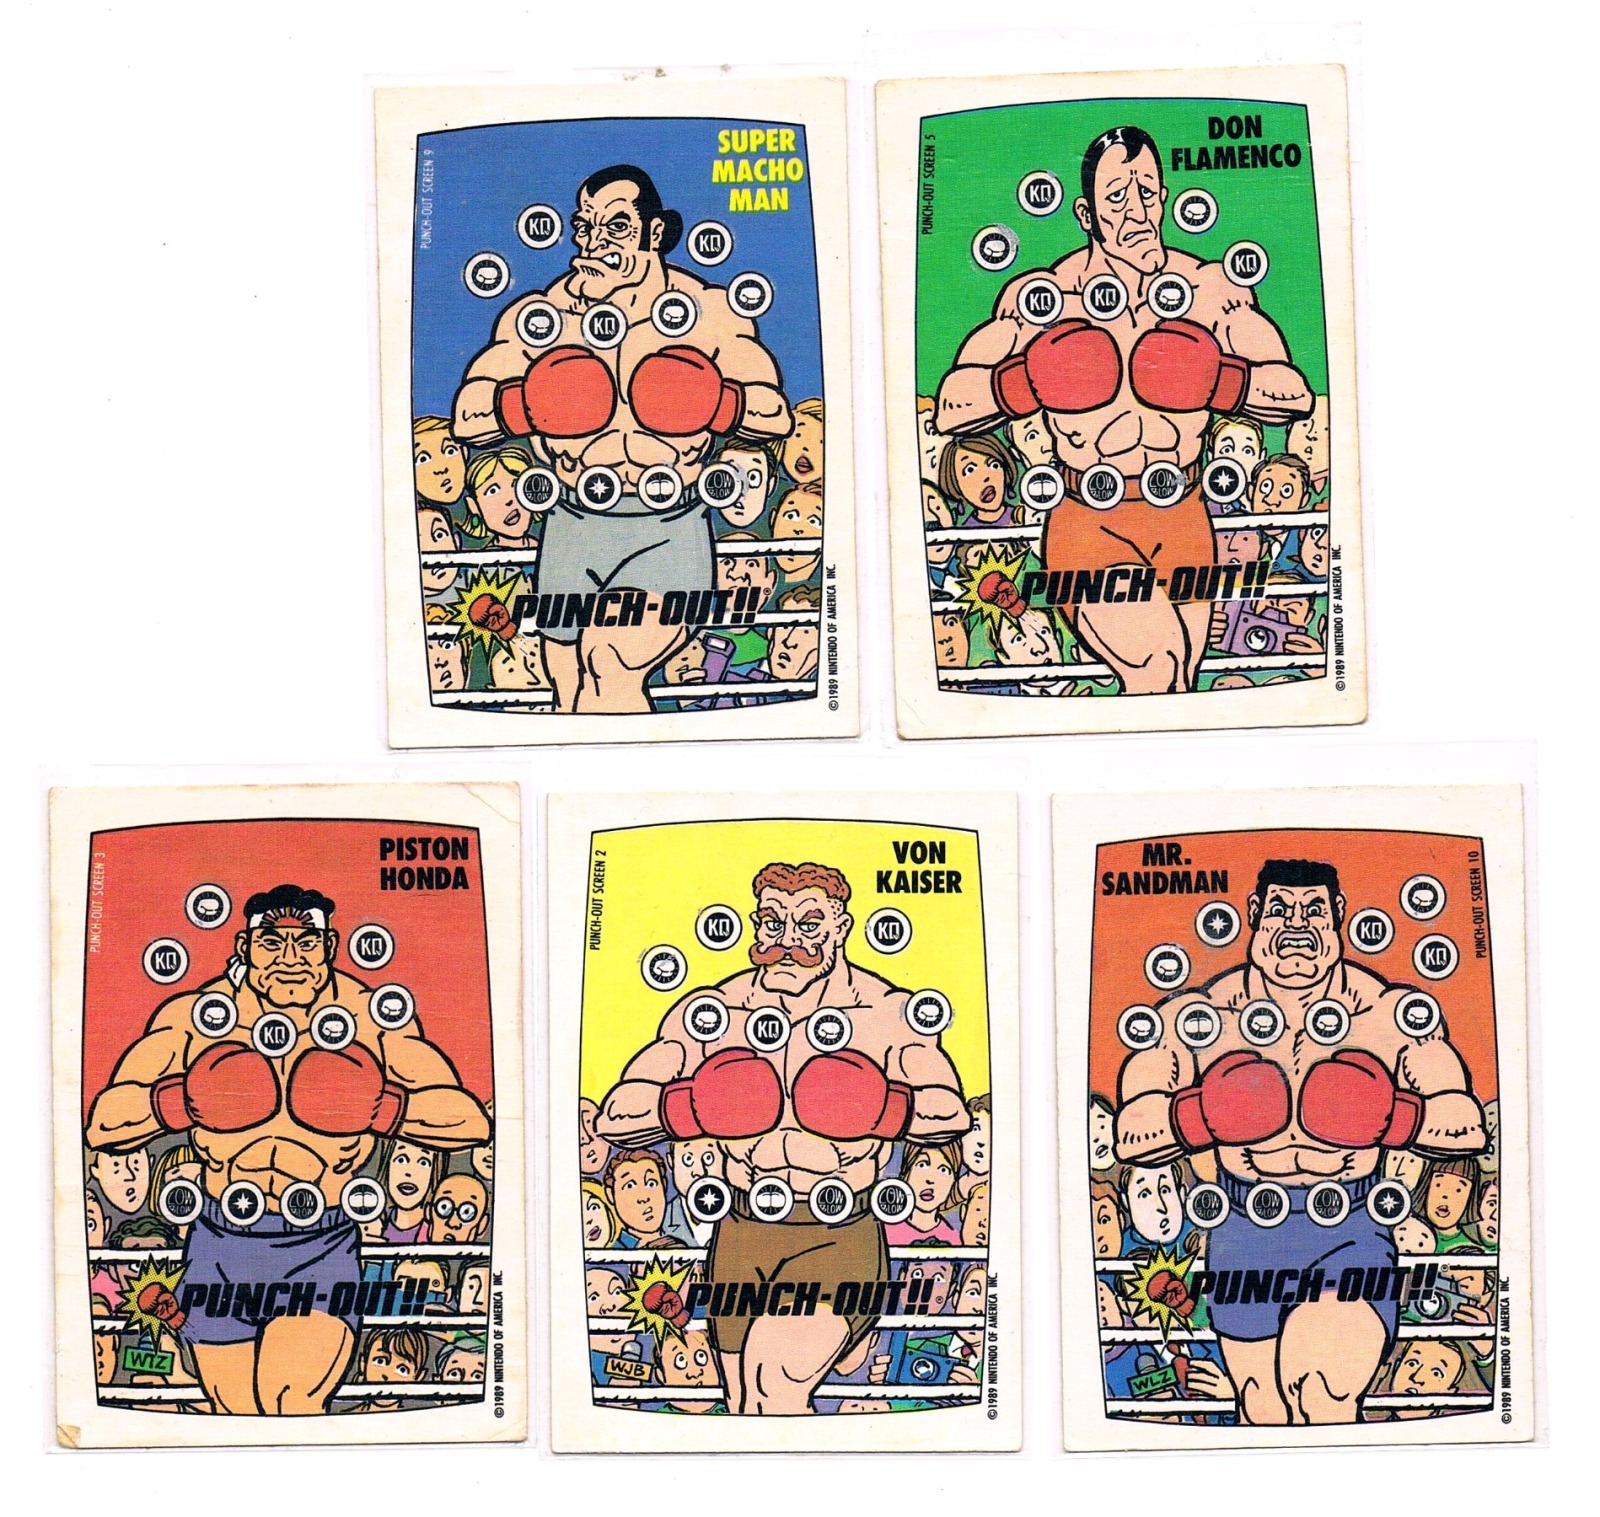 Punch Out - 5 Trading Cards / Rubbelkarten O-PEE-CHEE 1989